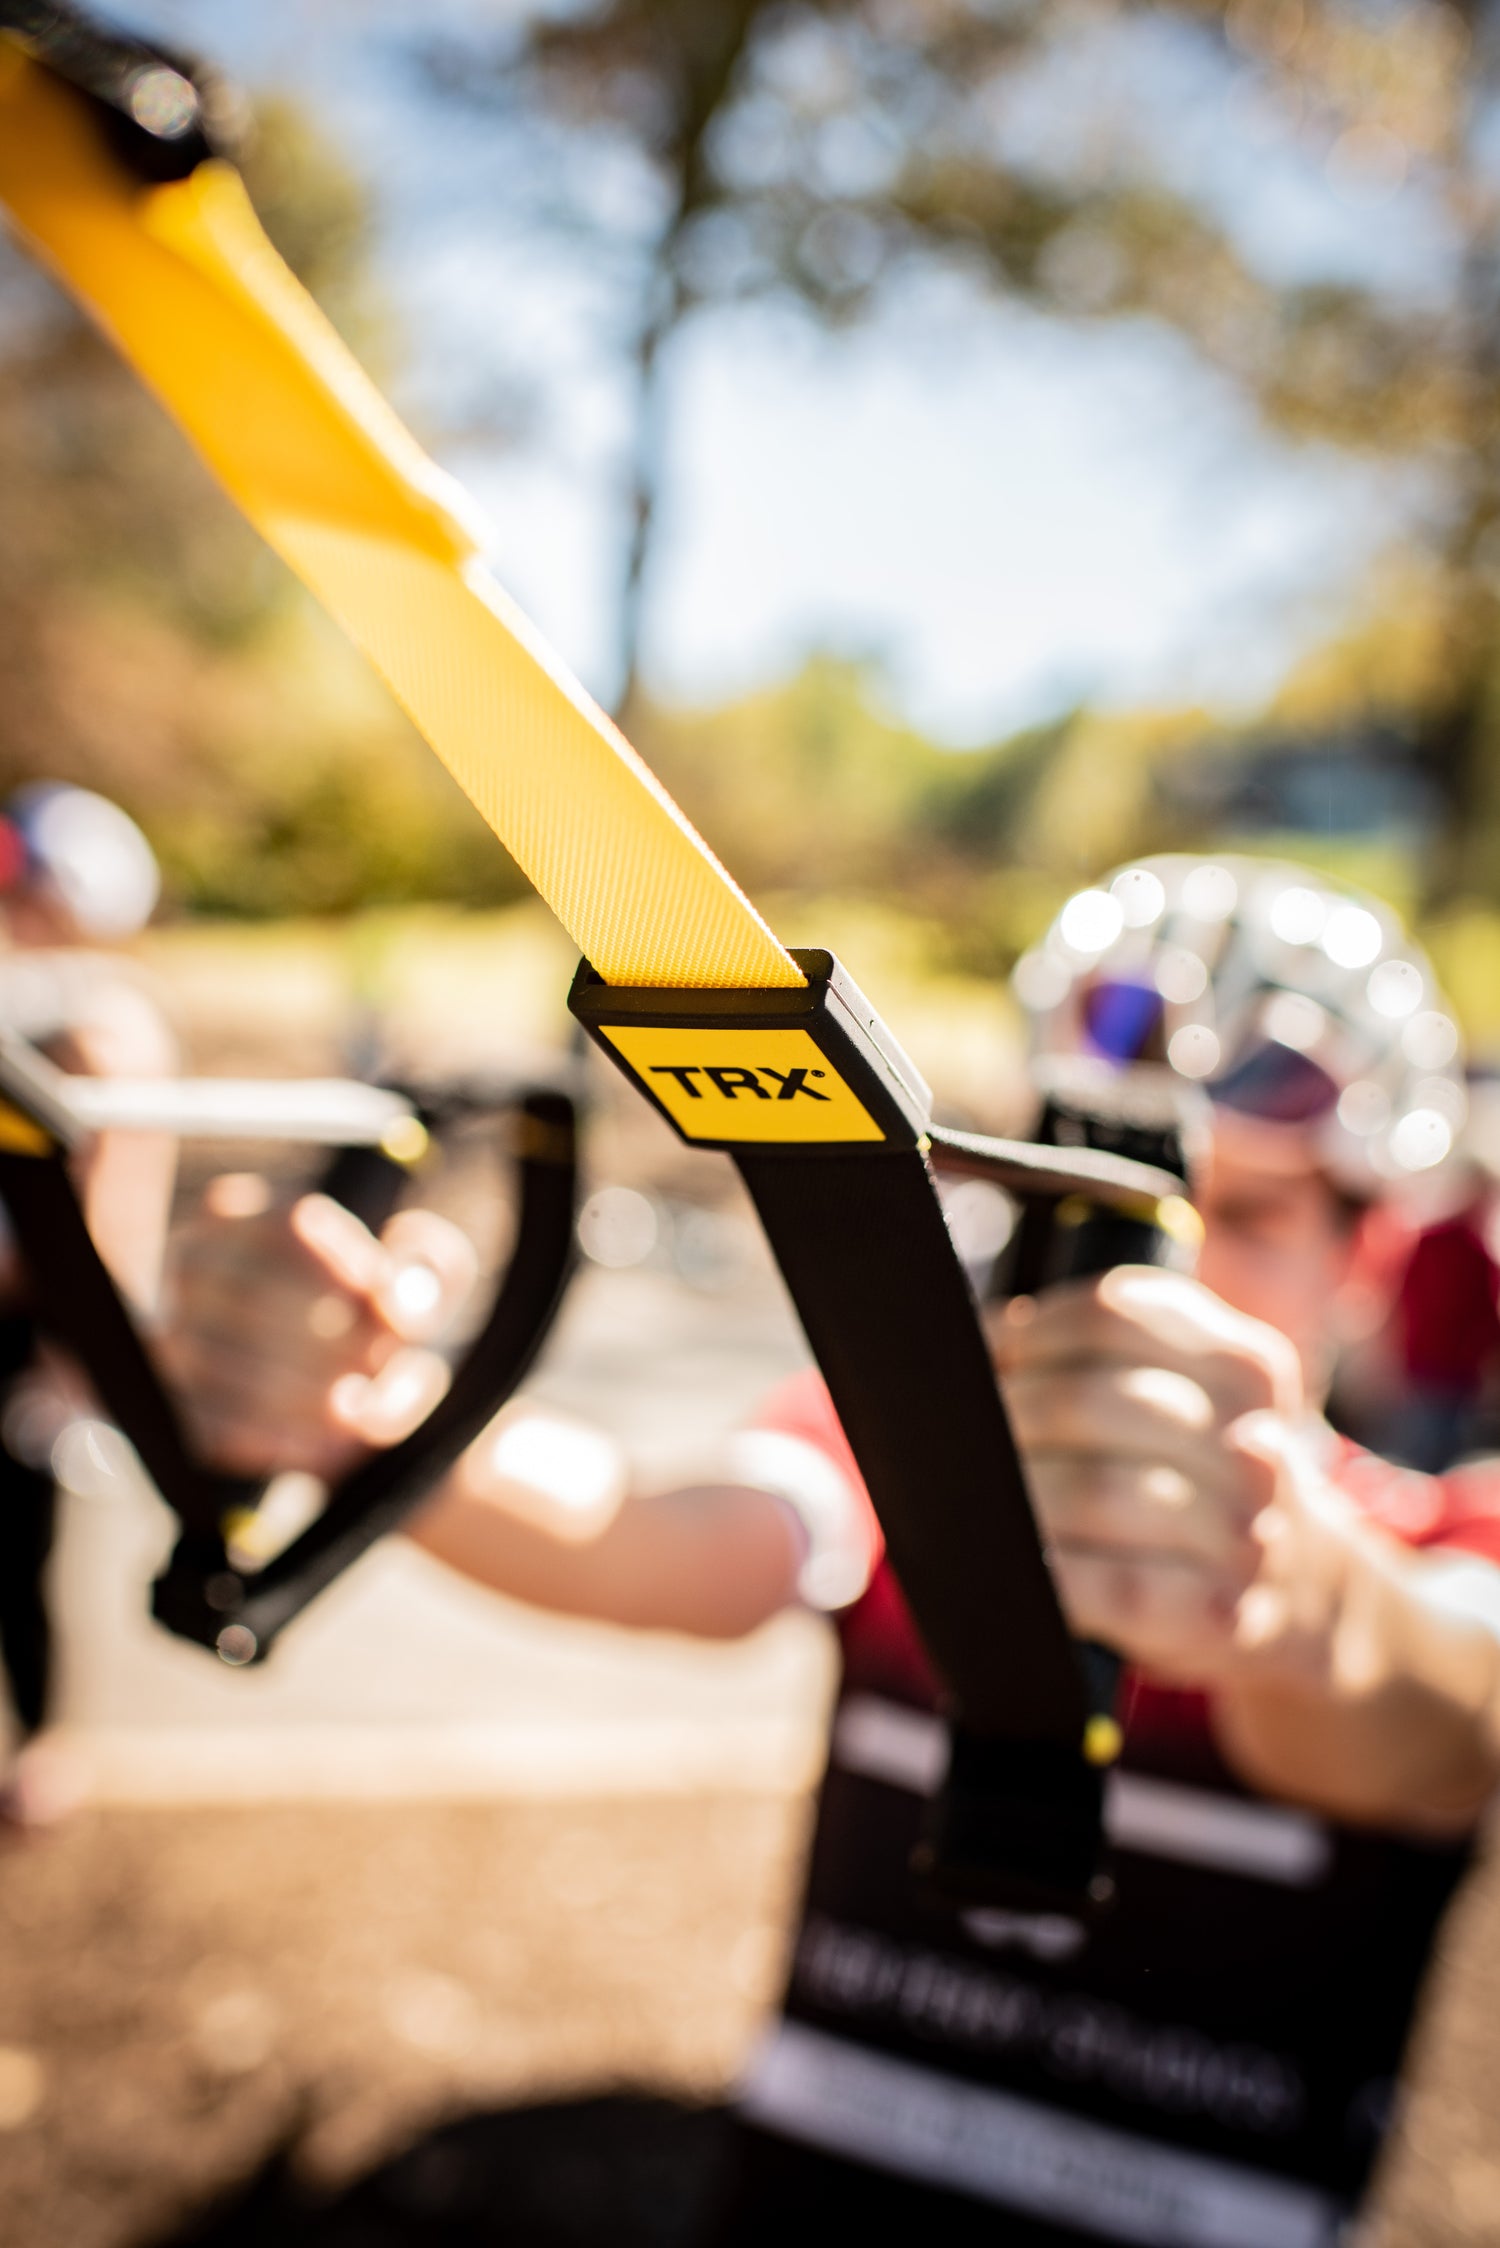 A cyclist wearing a riding kit, helmet, and sunglasses warms up outside using the TRX Suspension Trainer.